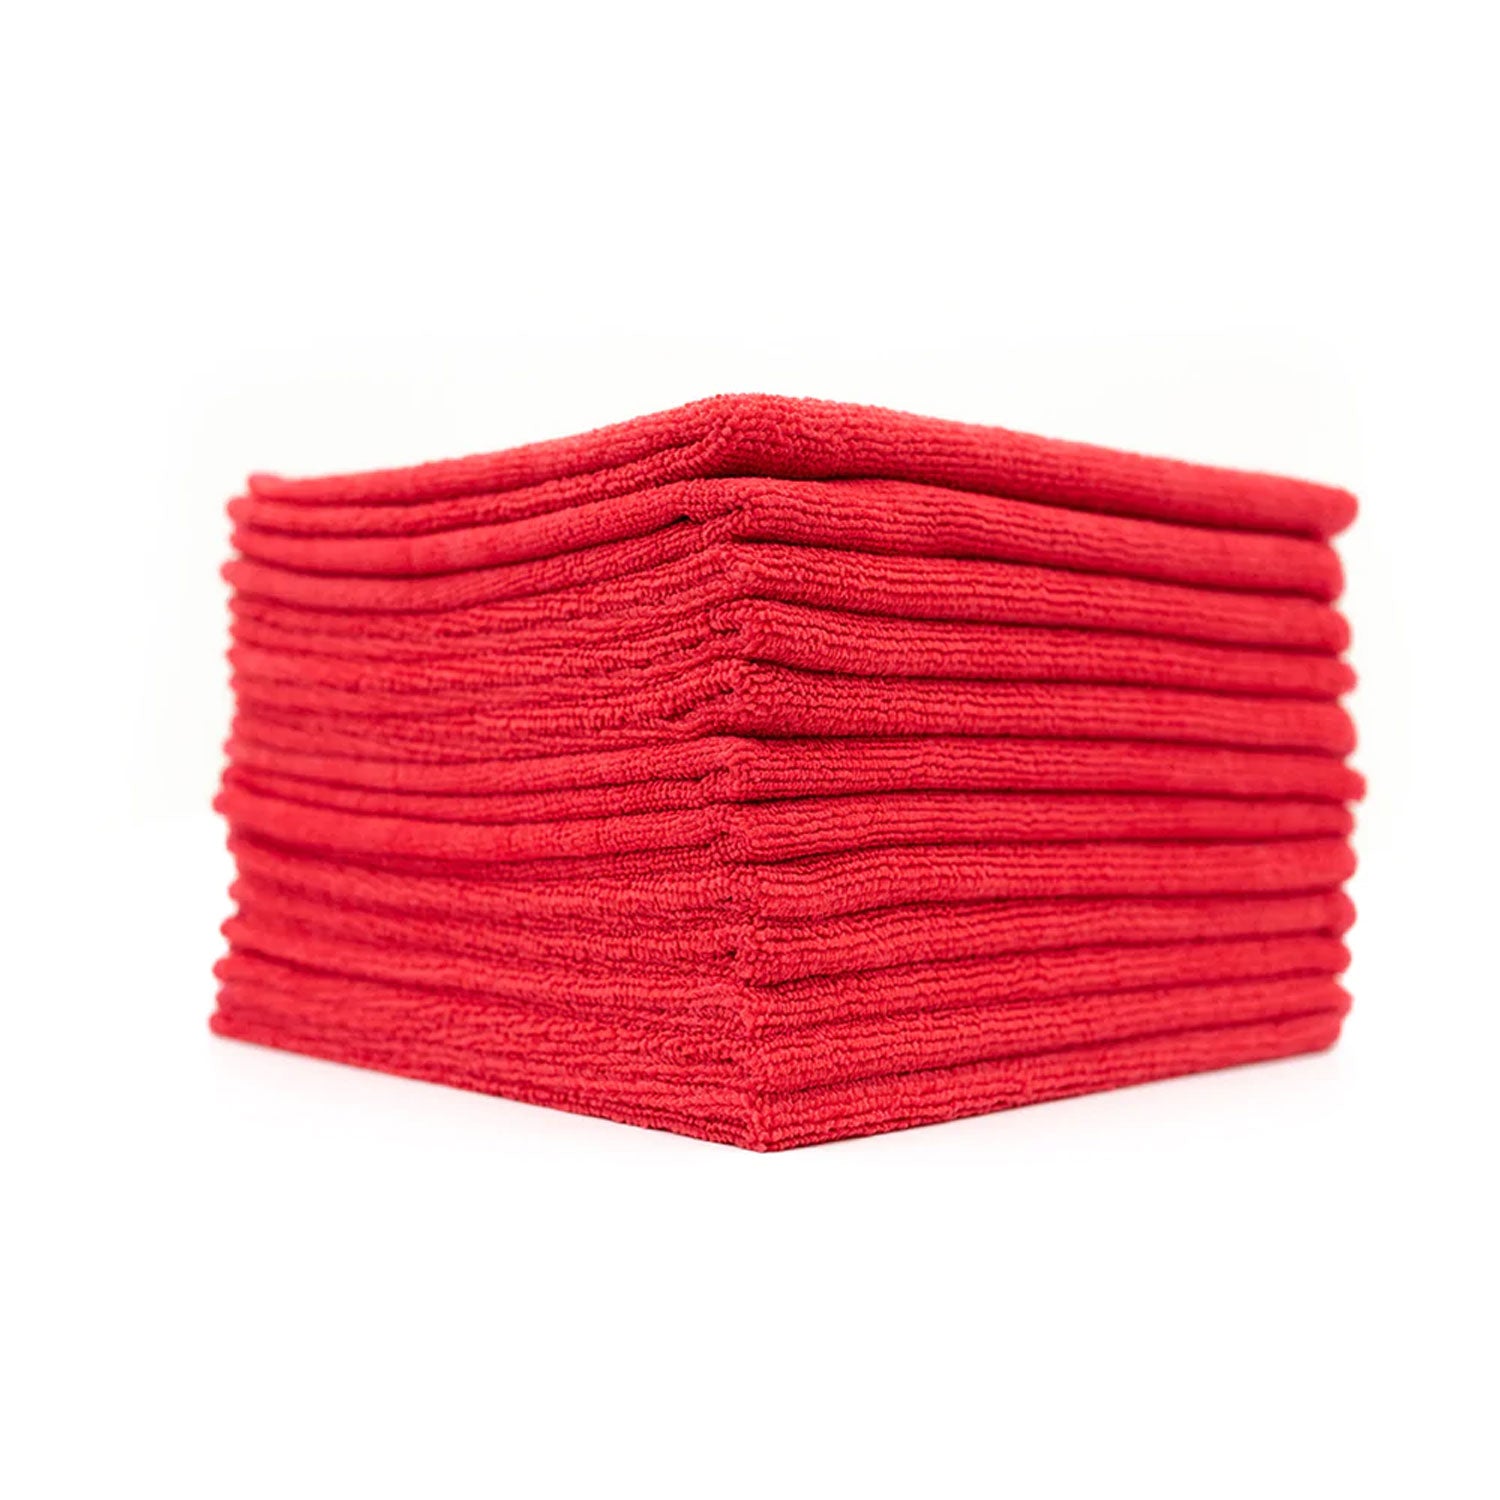 Red-stitched-edge-towels